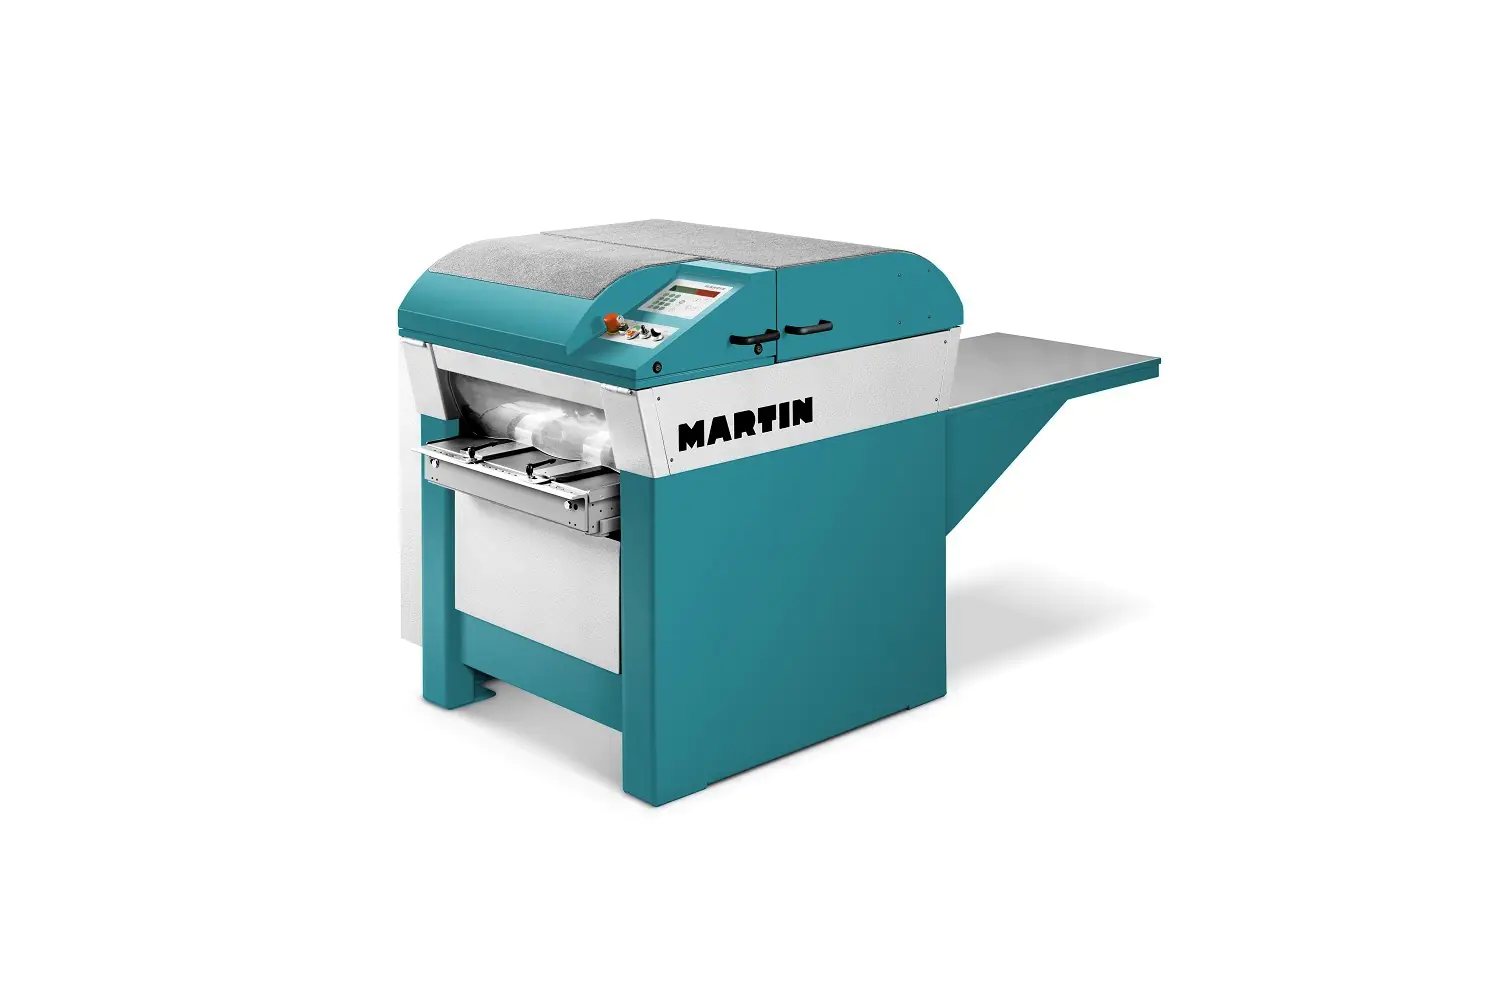 Martin T45 Thicknesser | Markfield Woodworking Machinery